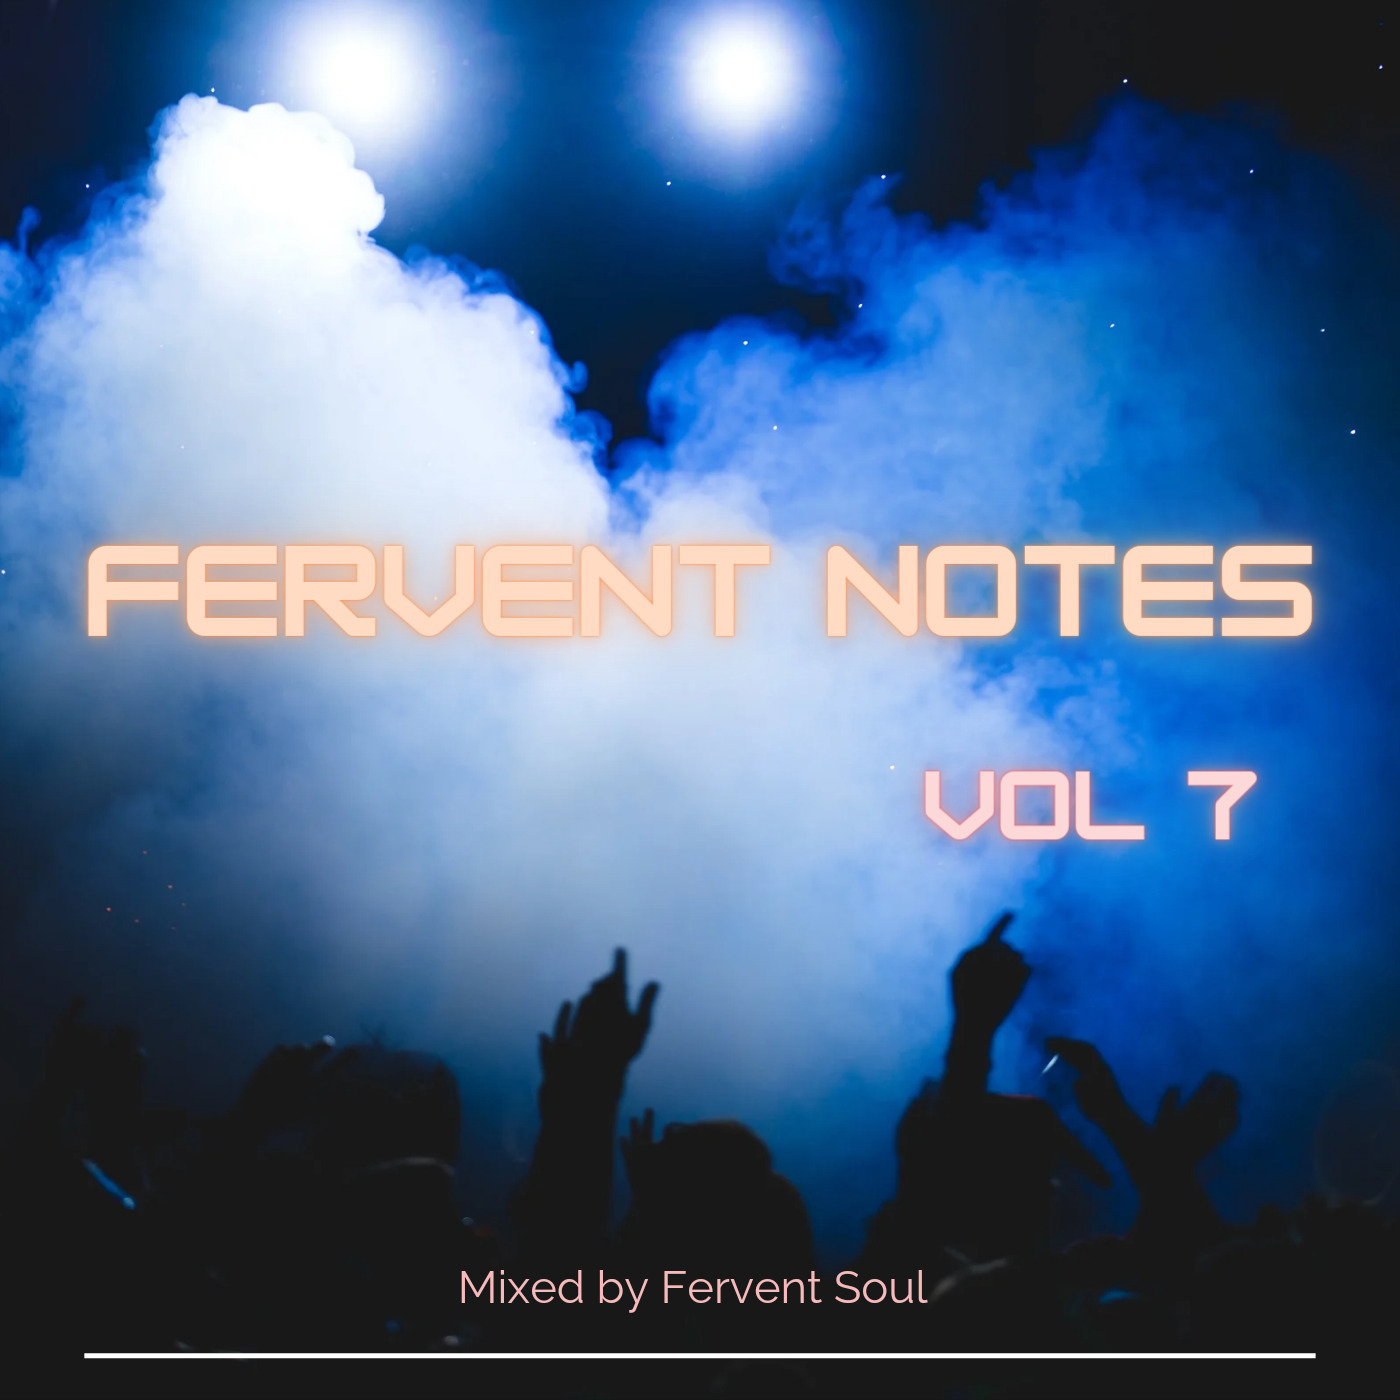 Fervent Notes Vol.7 Mixed By Fervent Soul